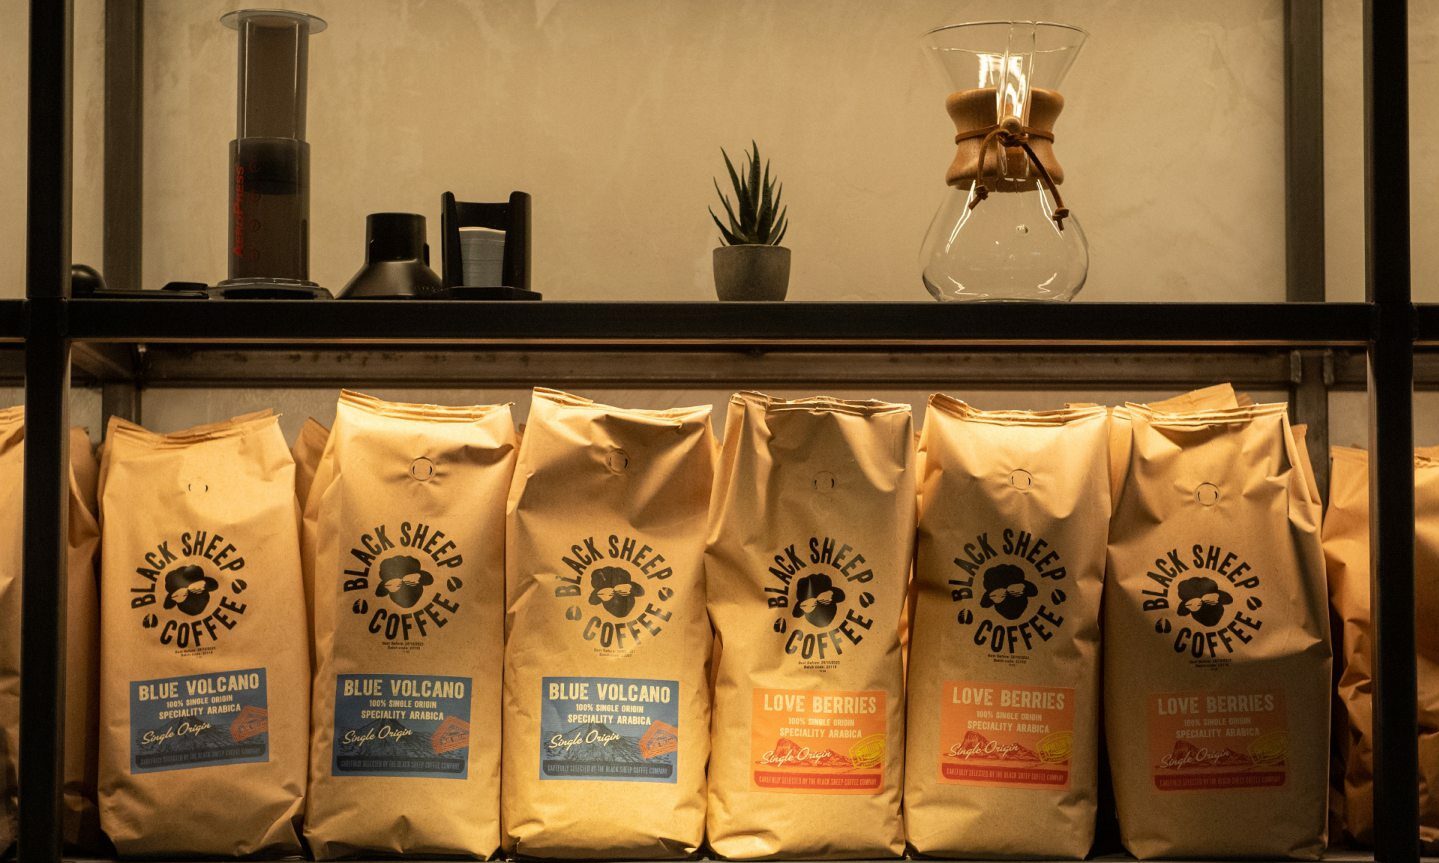 Bags of Black Sheep coffee beans in Aberdeen's Union Square